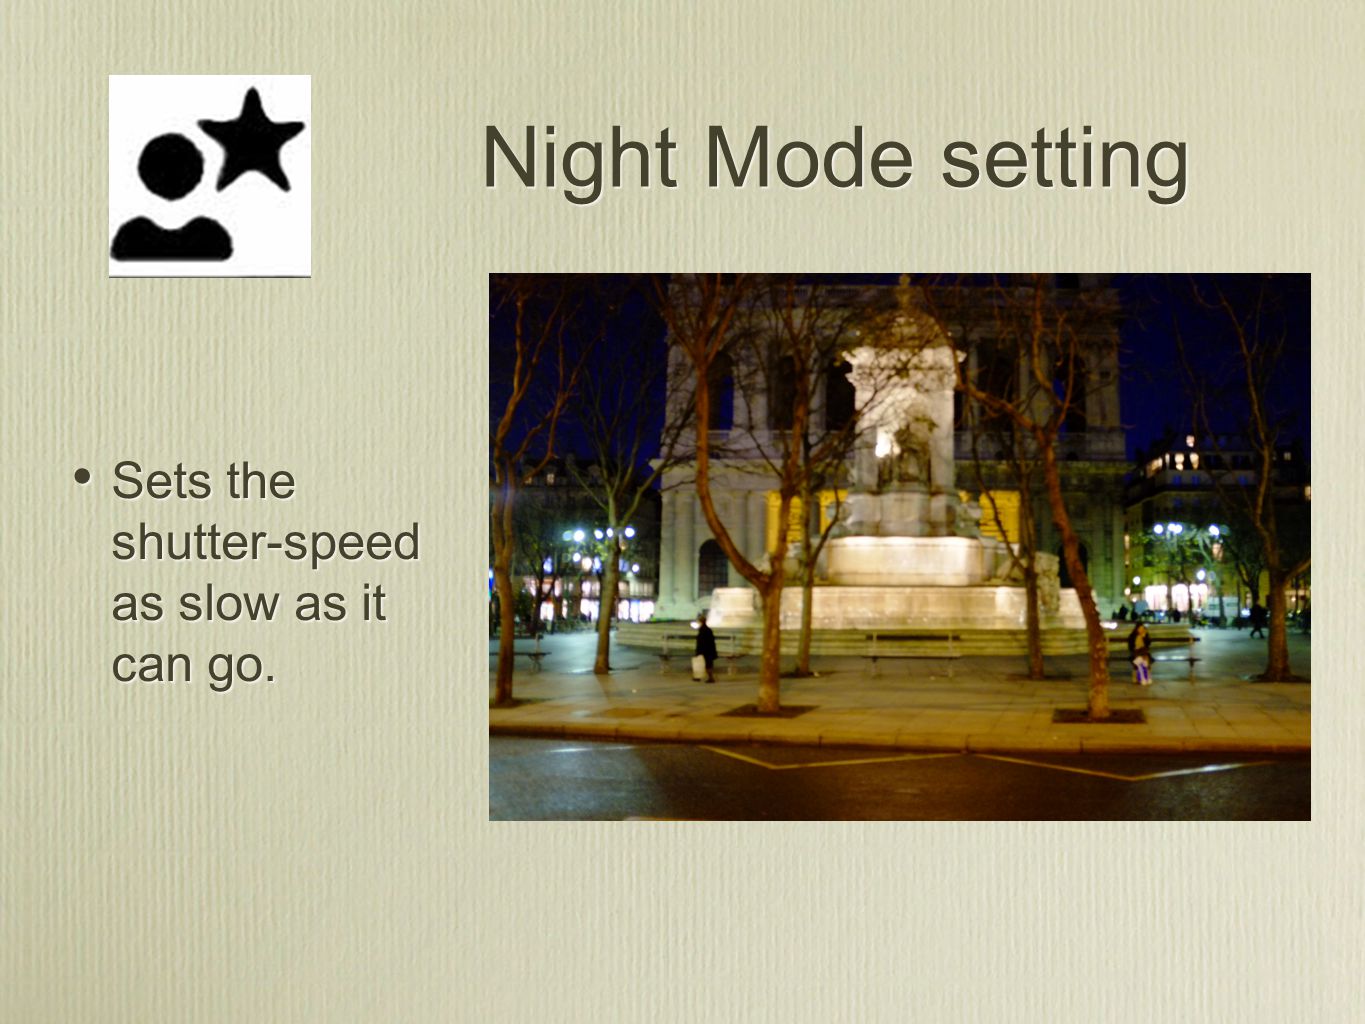 Night Mode setting Sets the shutter-speed as slow as it can go.